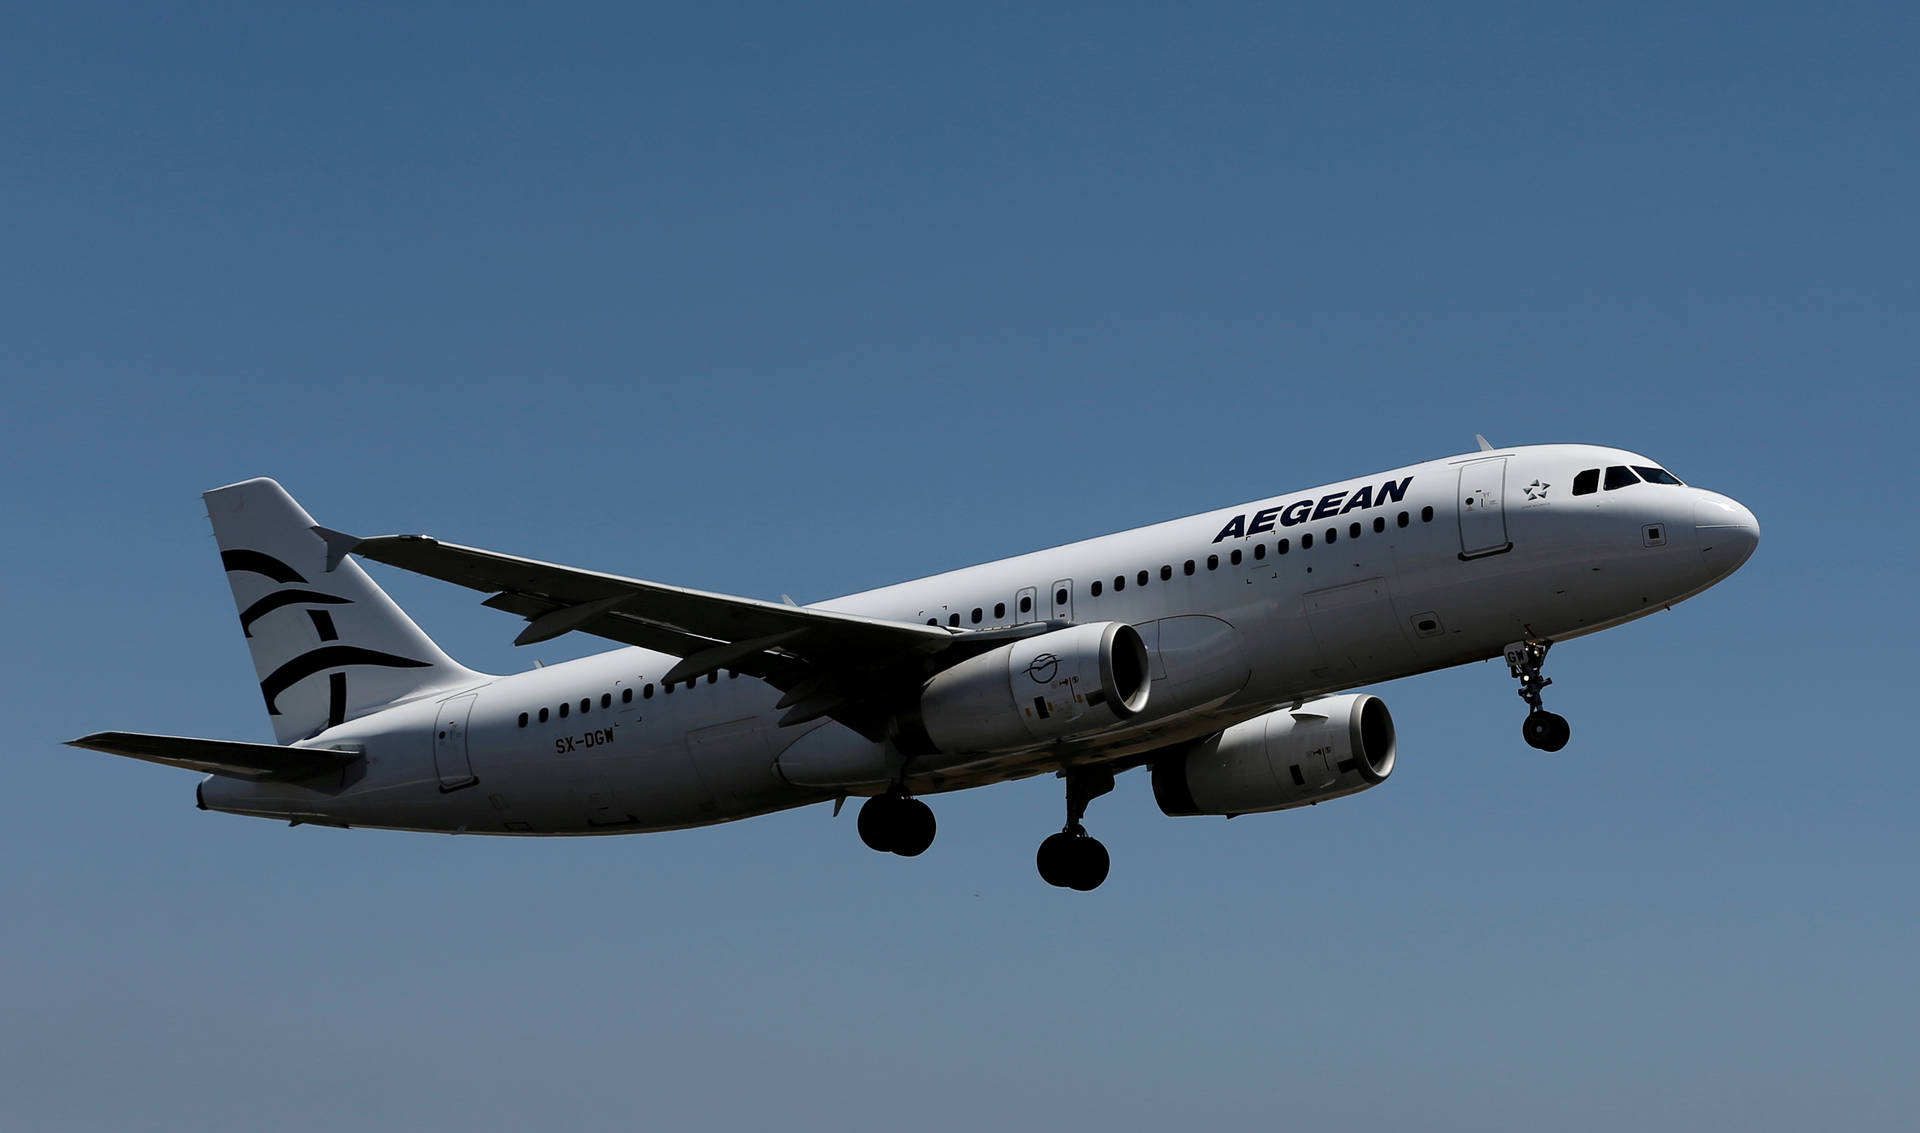 Fliegendesaegean-airlines Airbus A320-214 In Ombre-himmel Wallpaper